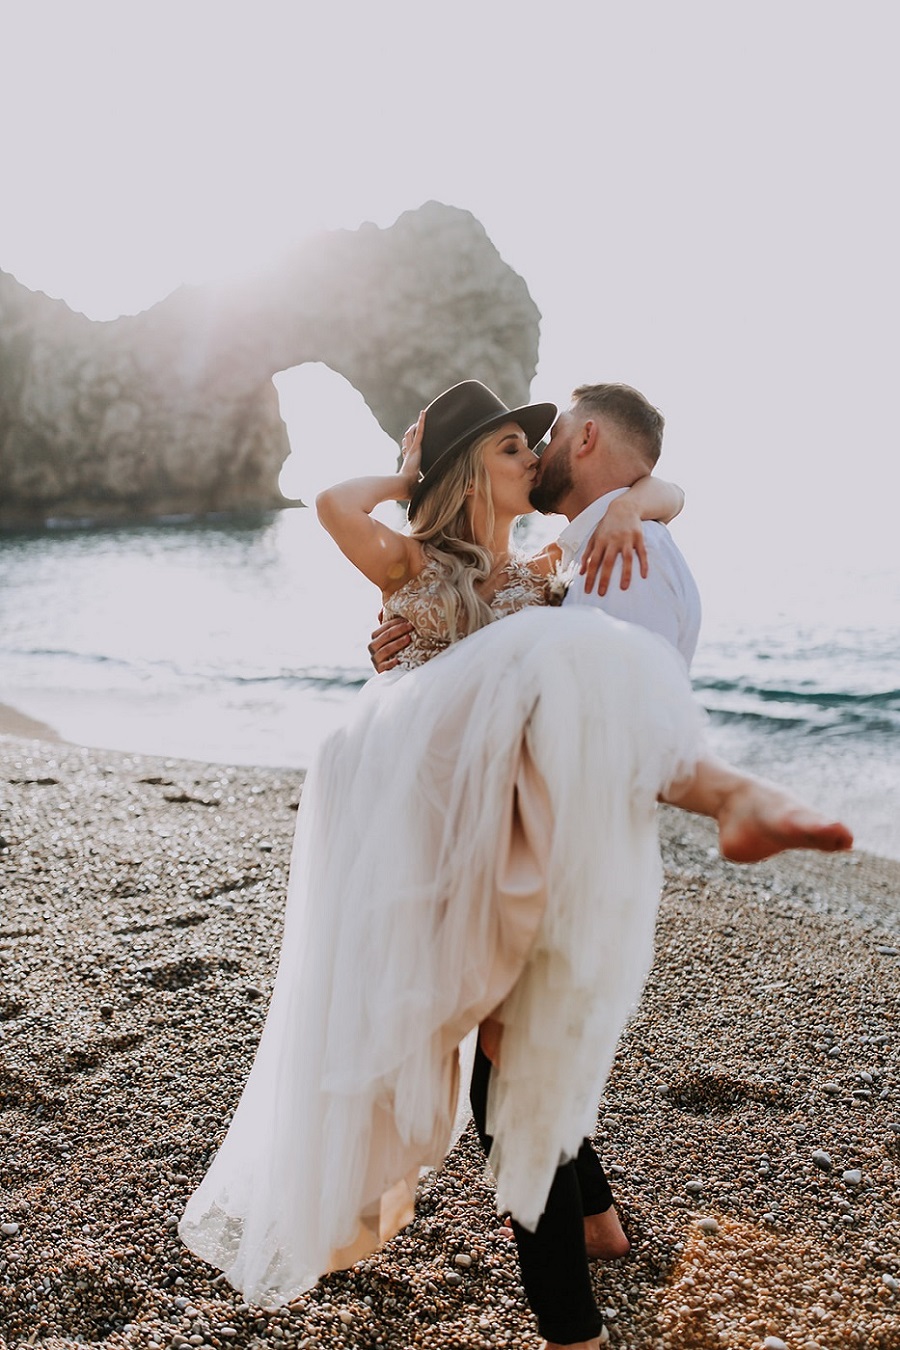 Sunrise elopement shoot! Westlake Photography and the Rustic Dresser (30)